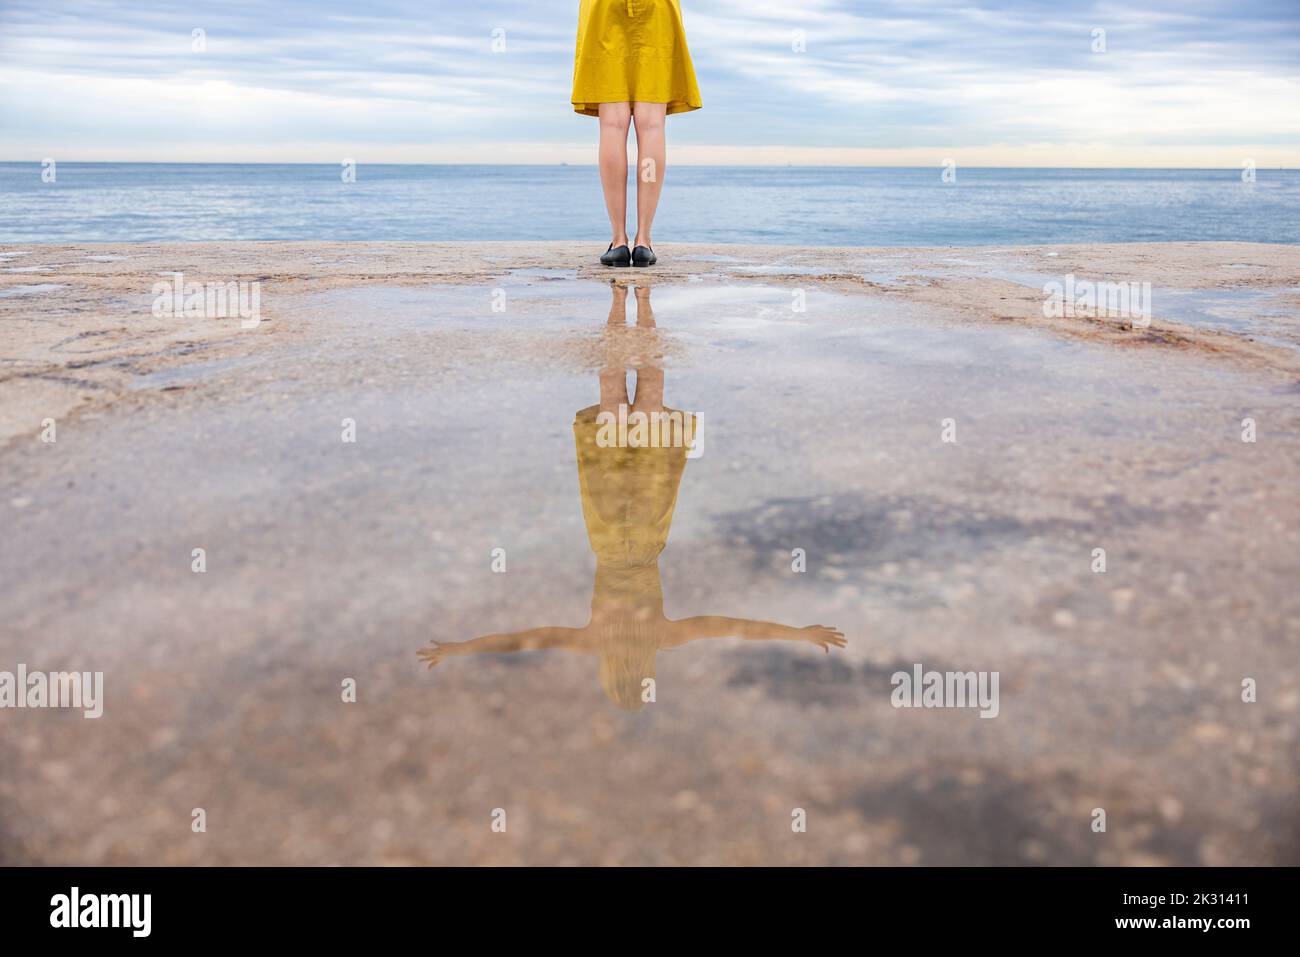 Woman with reflection on promenade Stock Photo